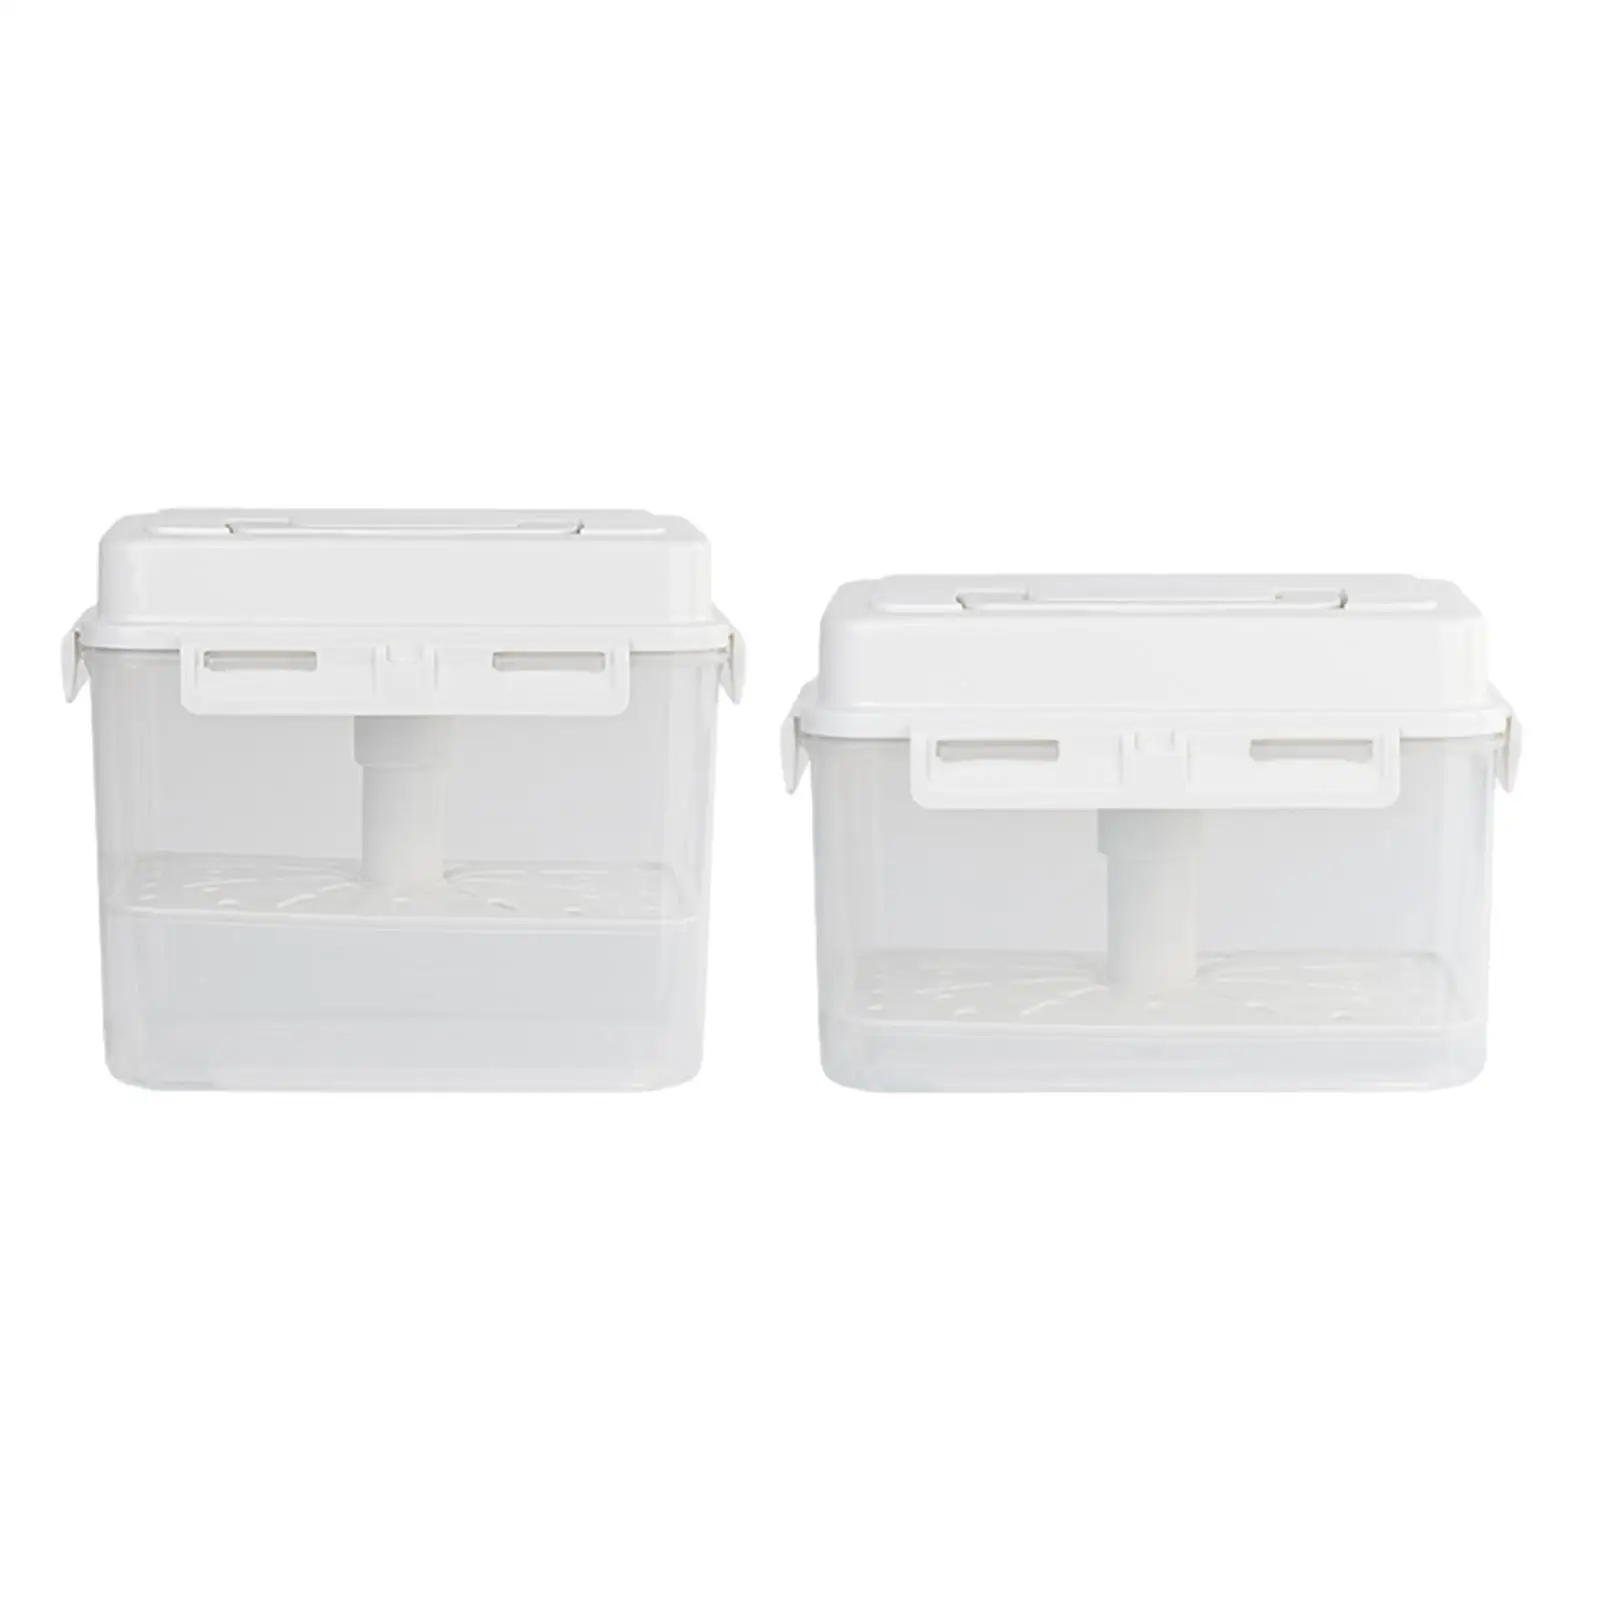 Kimchi Press Ferment Storage Container Press Plate Preservation Container for Travel Camping Work Refrigerator Countertop